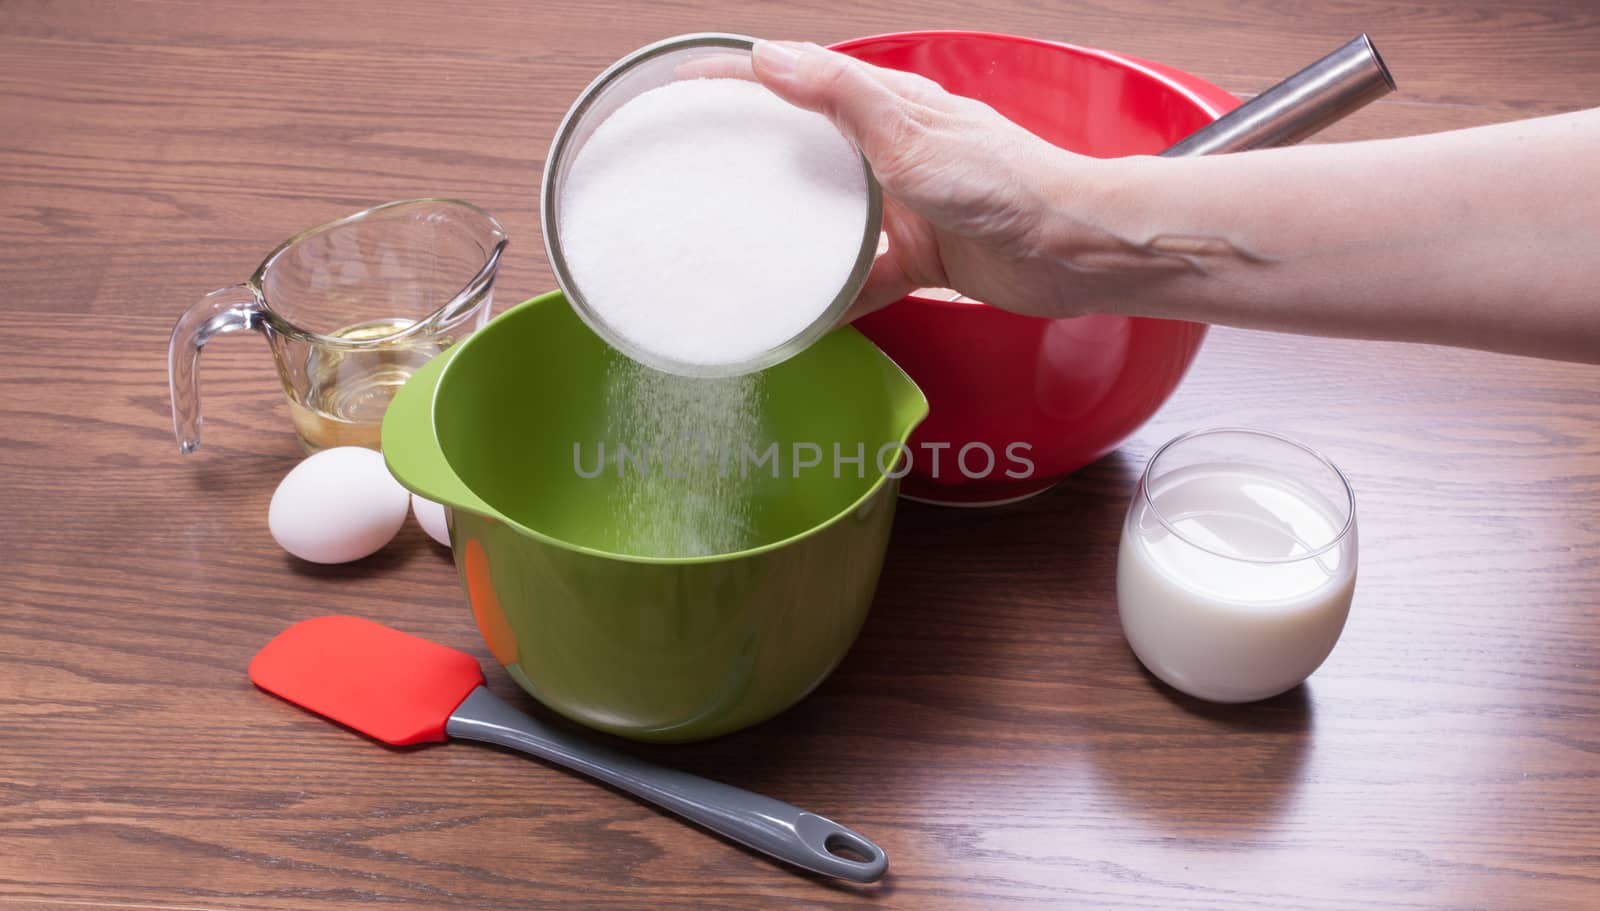 Pouring some sugar in a bowl to make a homemade cake by lanalanglois